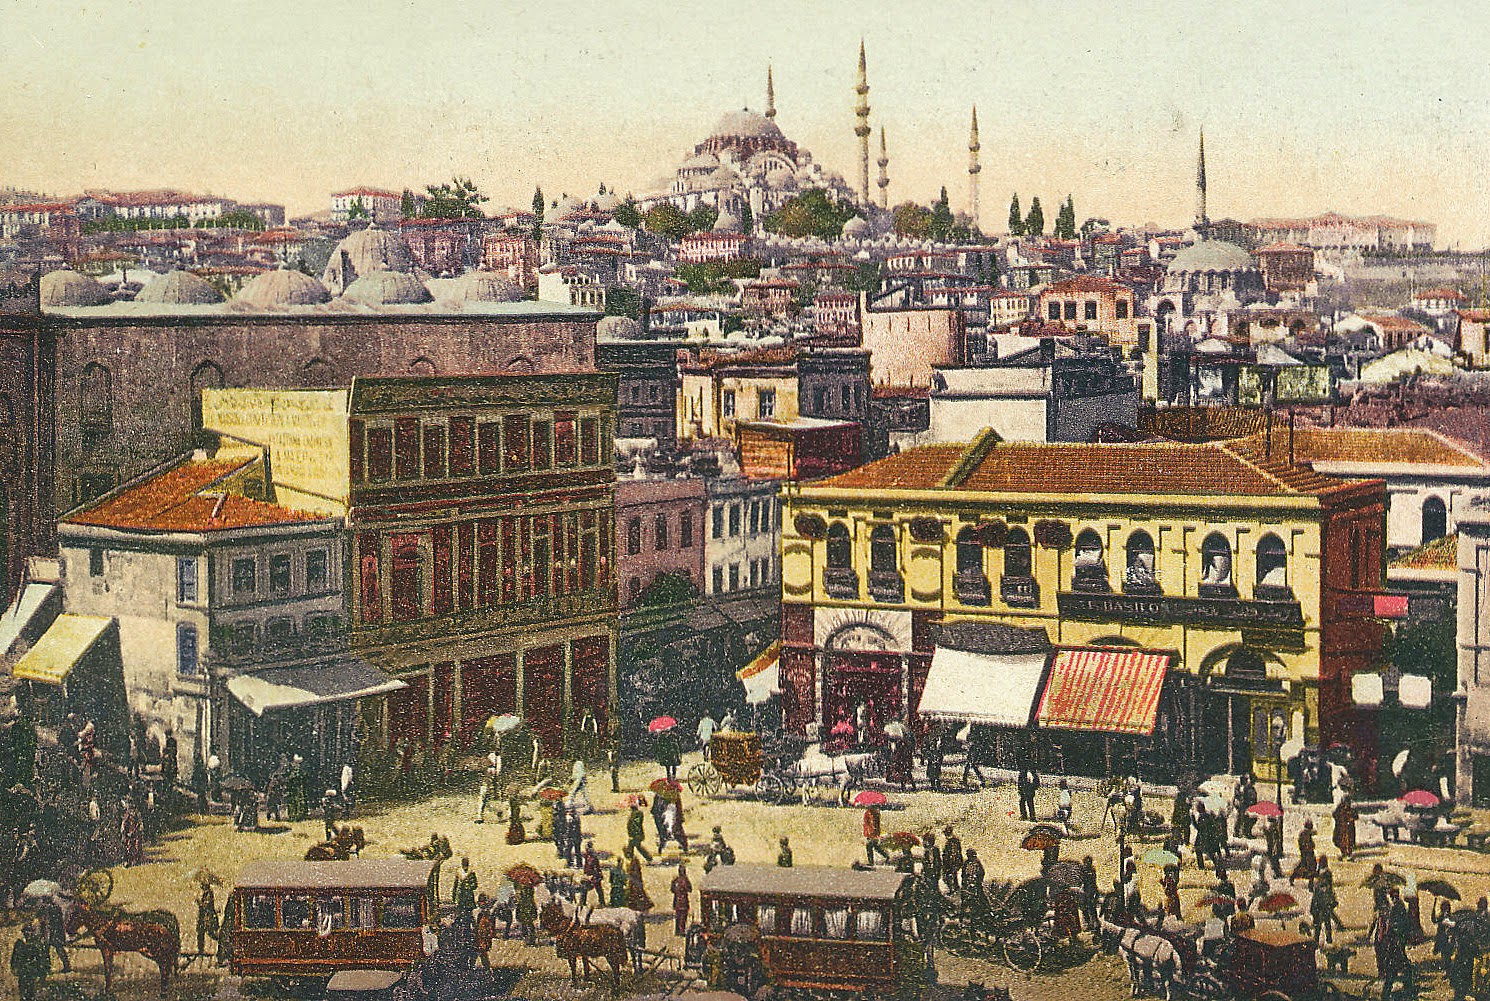 The central Emin Eunu square in Constantinople, represented on a postcard of the early twentieth century